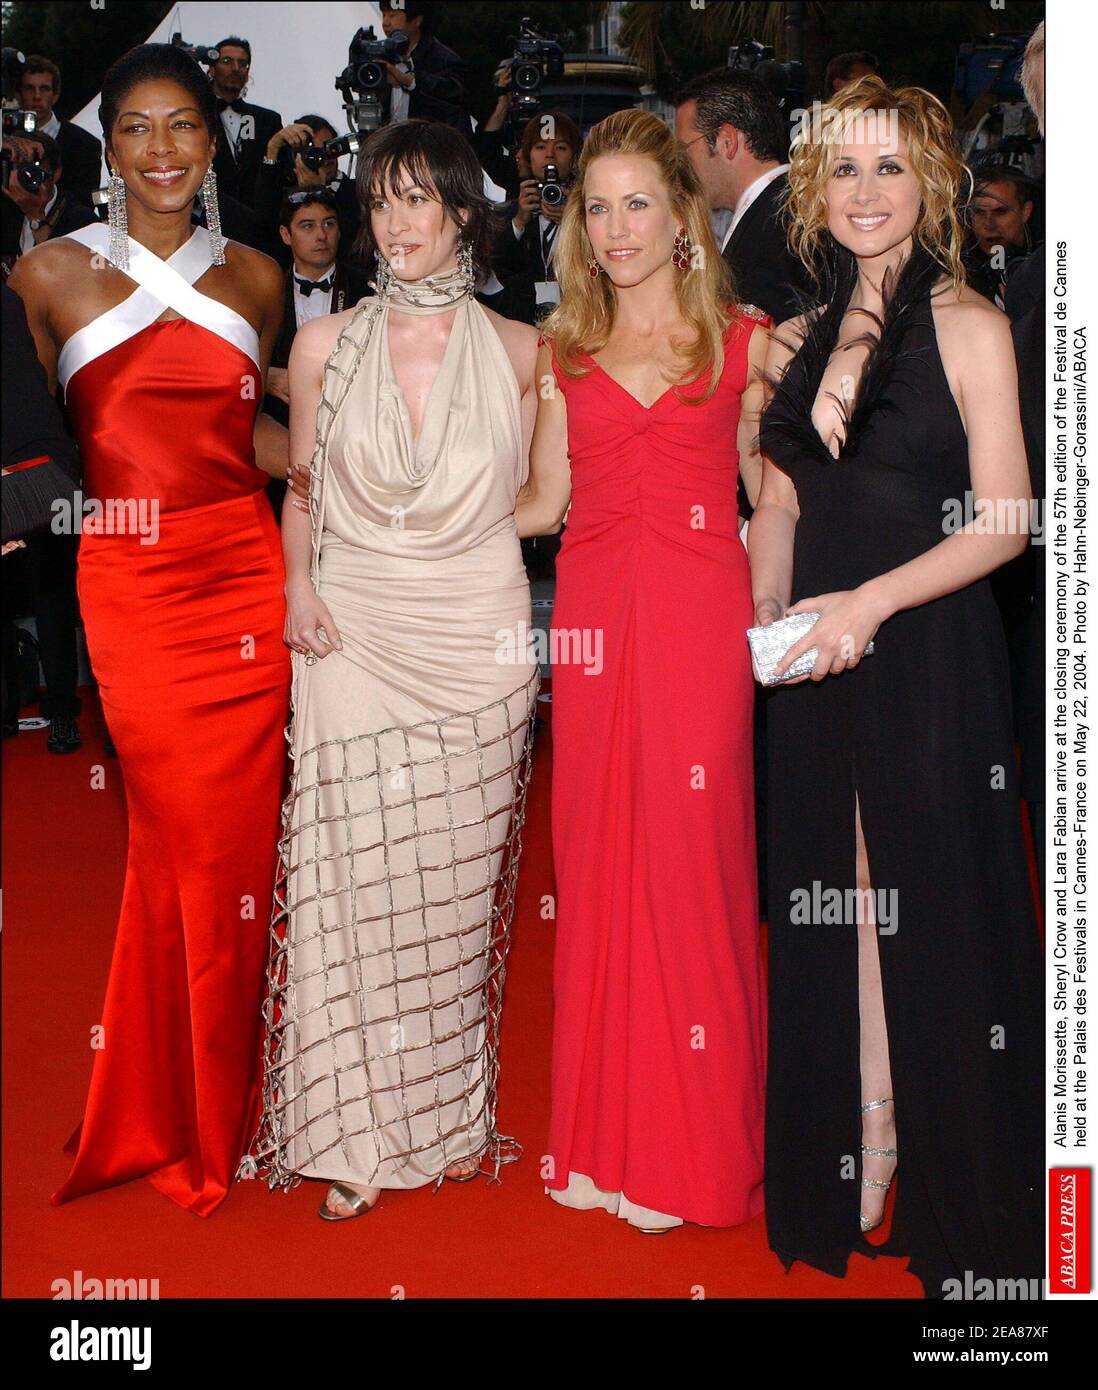 Alanis Morissette, Sheryl Crow and Lara Fabian arrive at the closing ceremony of the 57th edition of the Festival de Cannes held at the Palais des Festivals in Cannes-France on May 22, 2004. Photo by Hahn-Nebinger-Gorassini/ABACA Stock Photo